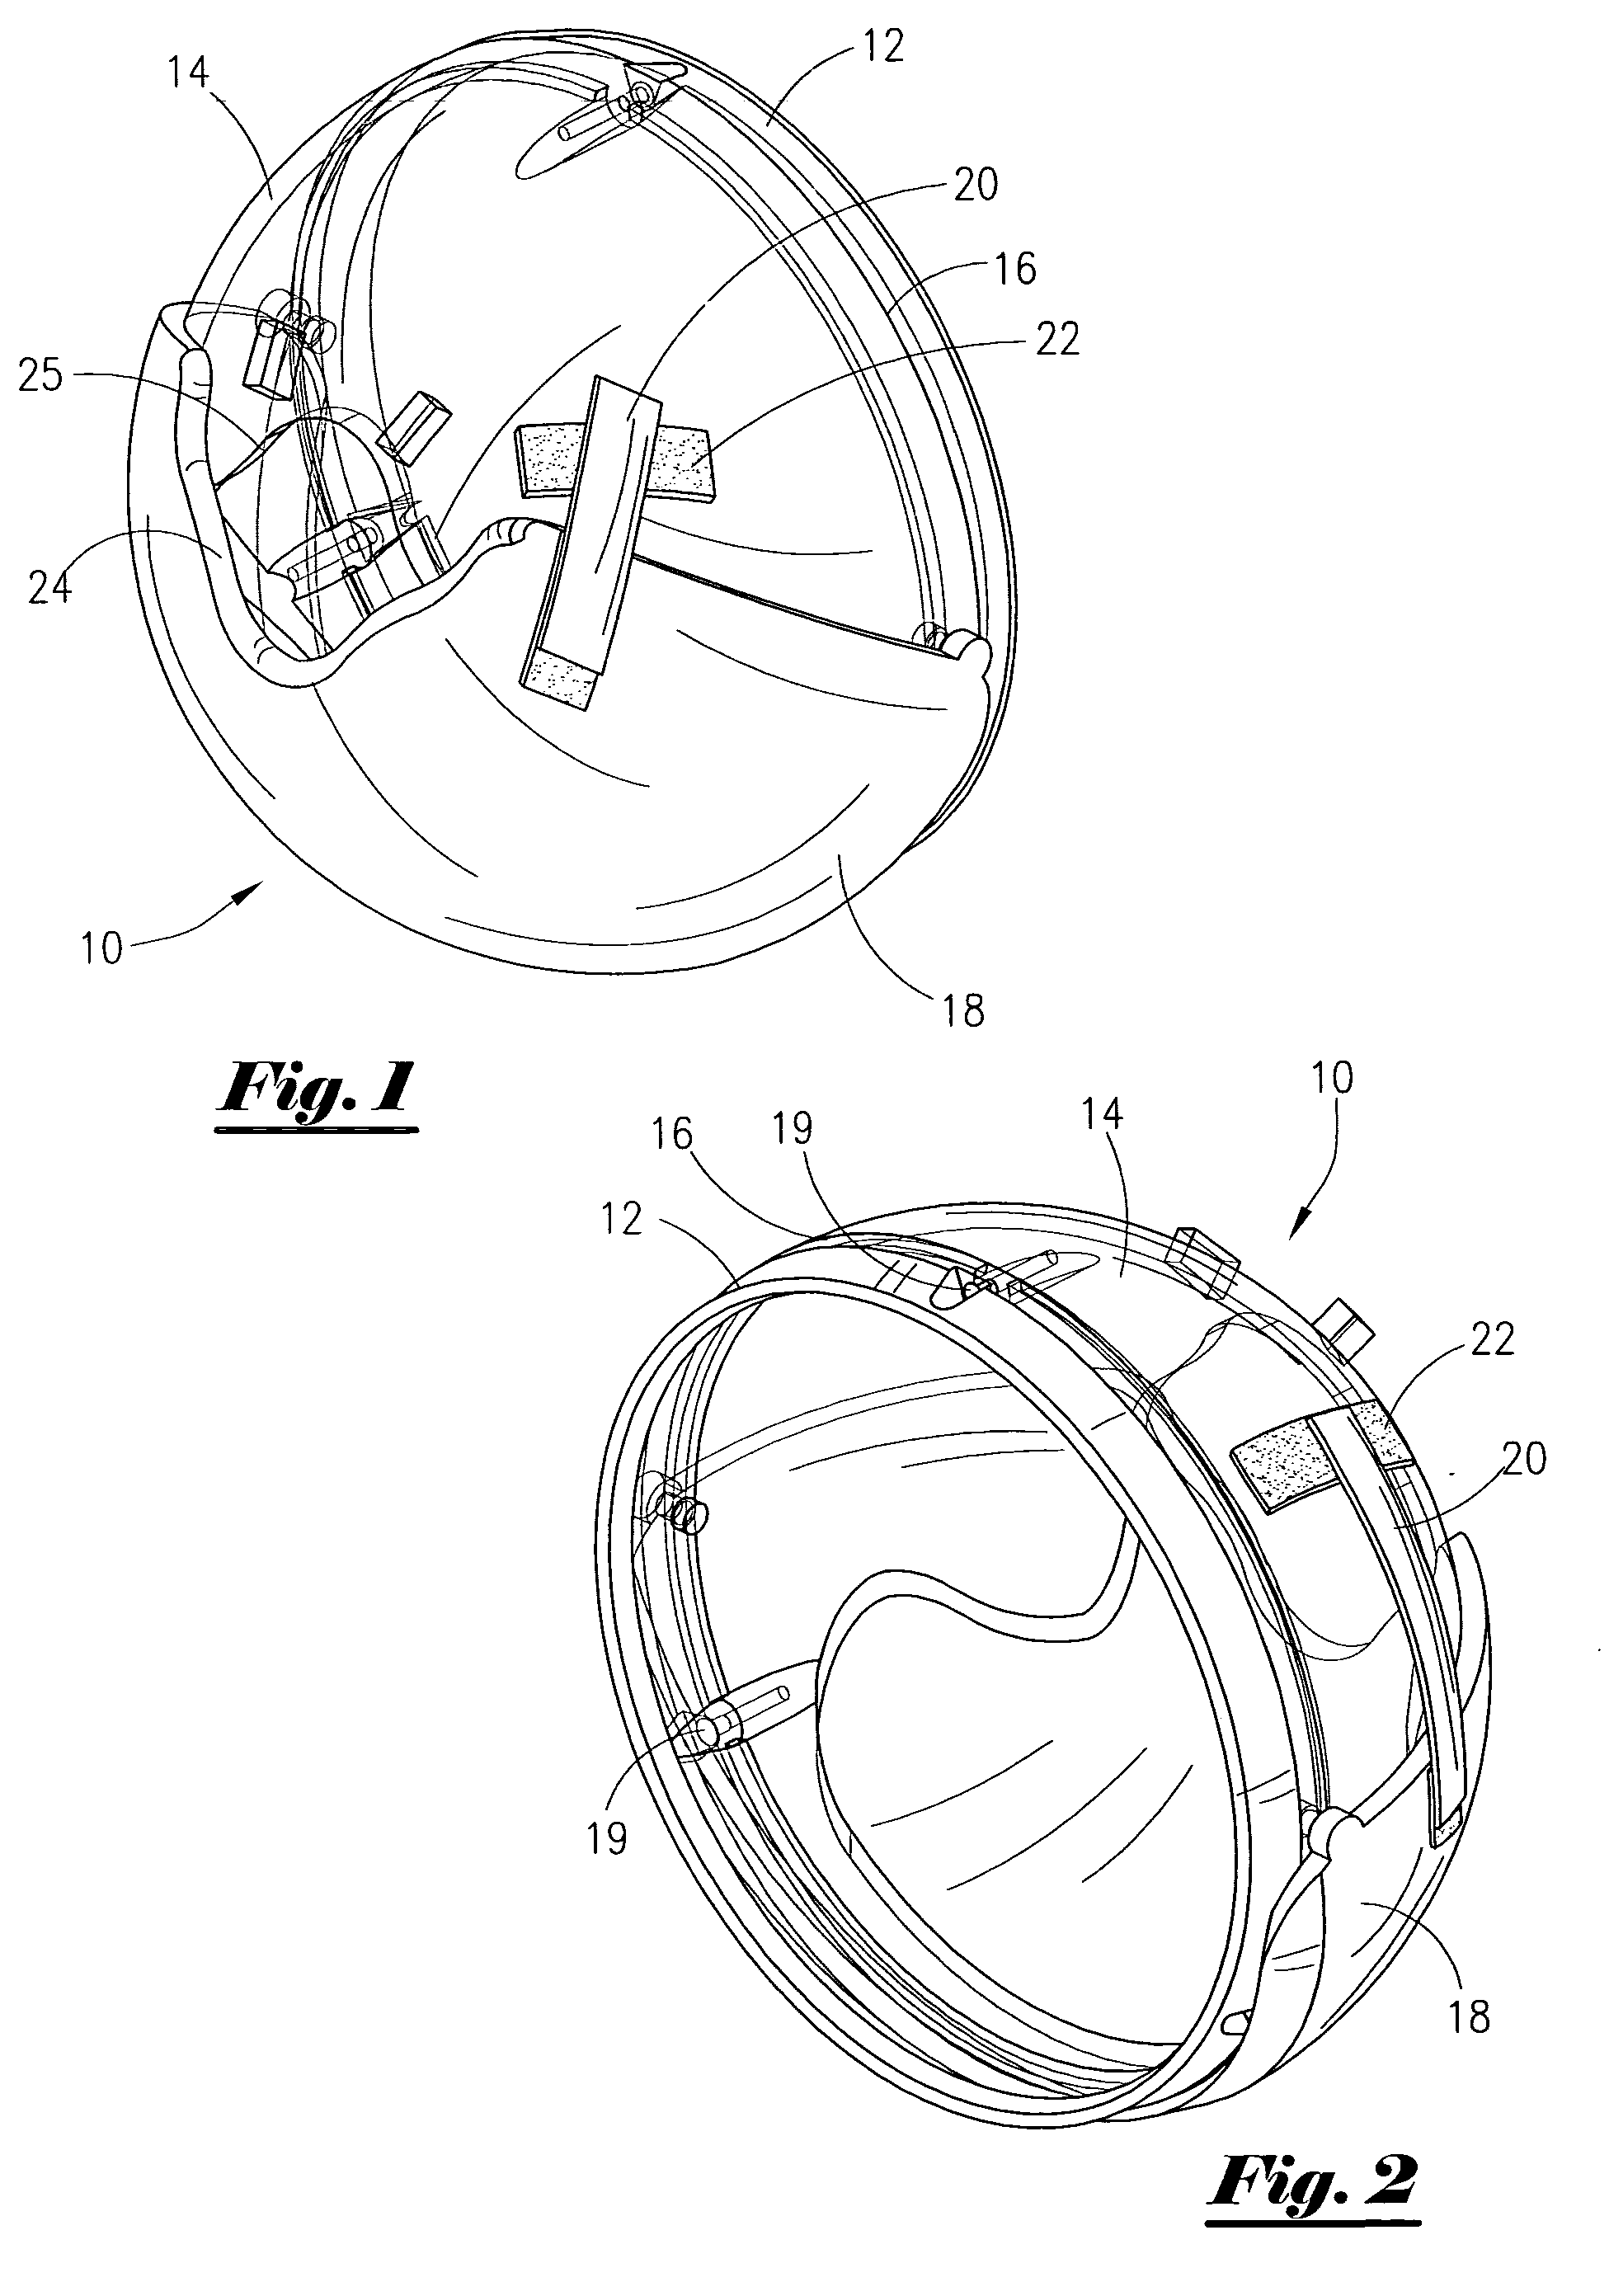 Apparatus and method for partially encapsulating an animal's head